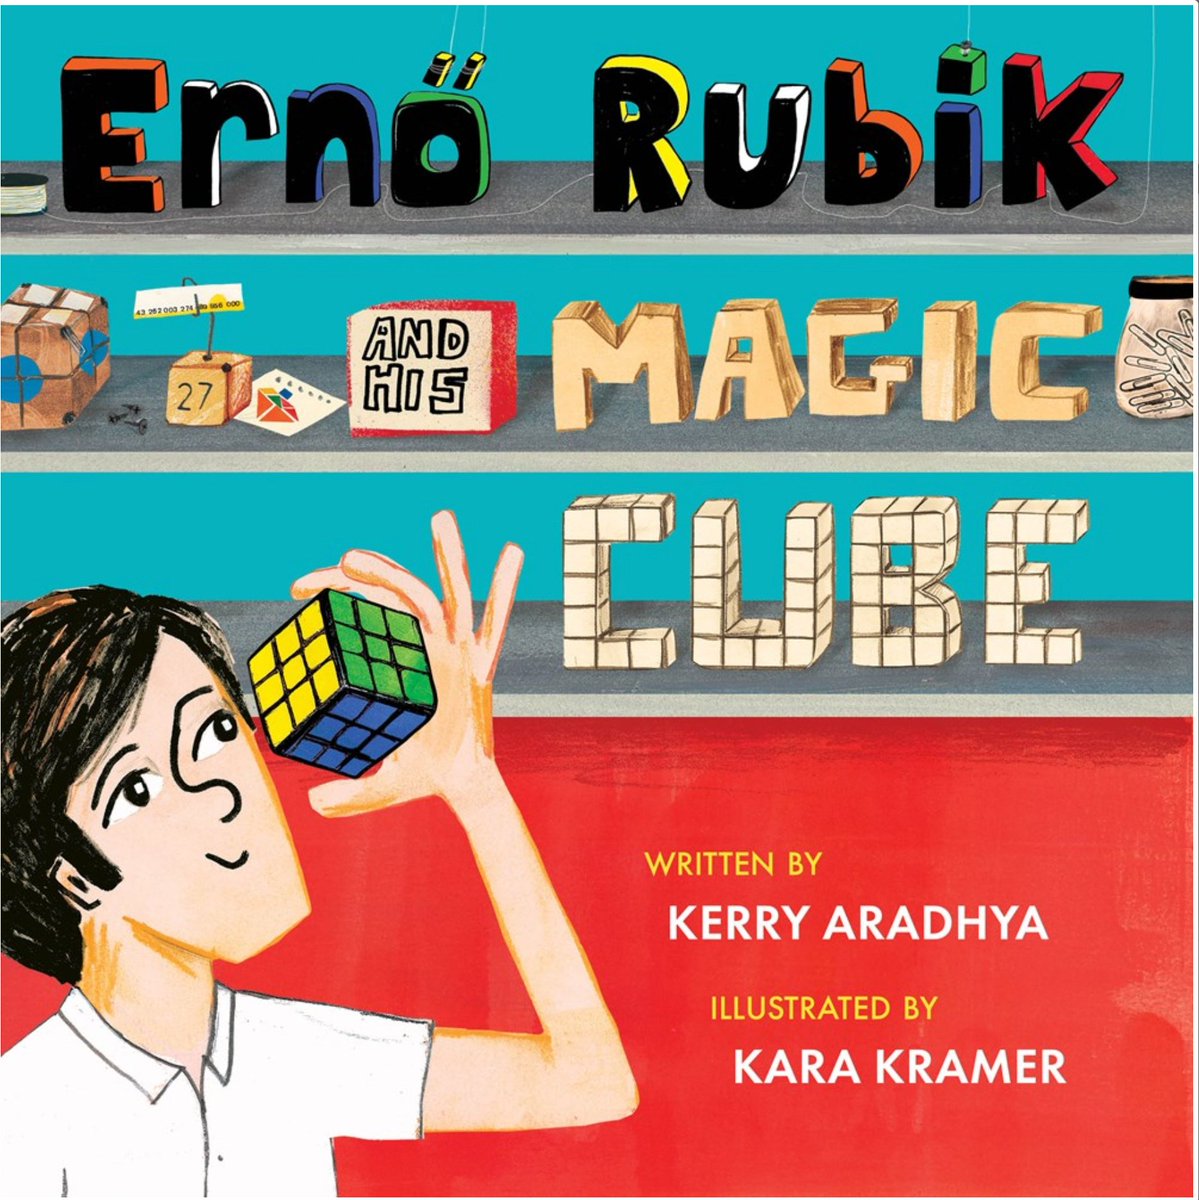 Sneak preview (pub date 6/11!) of a delightful celebration of creativity, intuition and logic! 'Ernő thought the three-dimensional objects he created out of his little cubes were beautiful.'-@kerryaradhya @SteamTeamBooks Featured on my blog of pb bios: jeanneharvey.com/single-post/re…